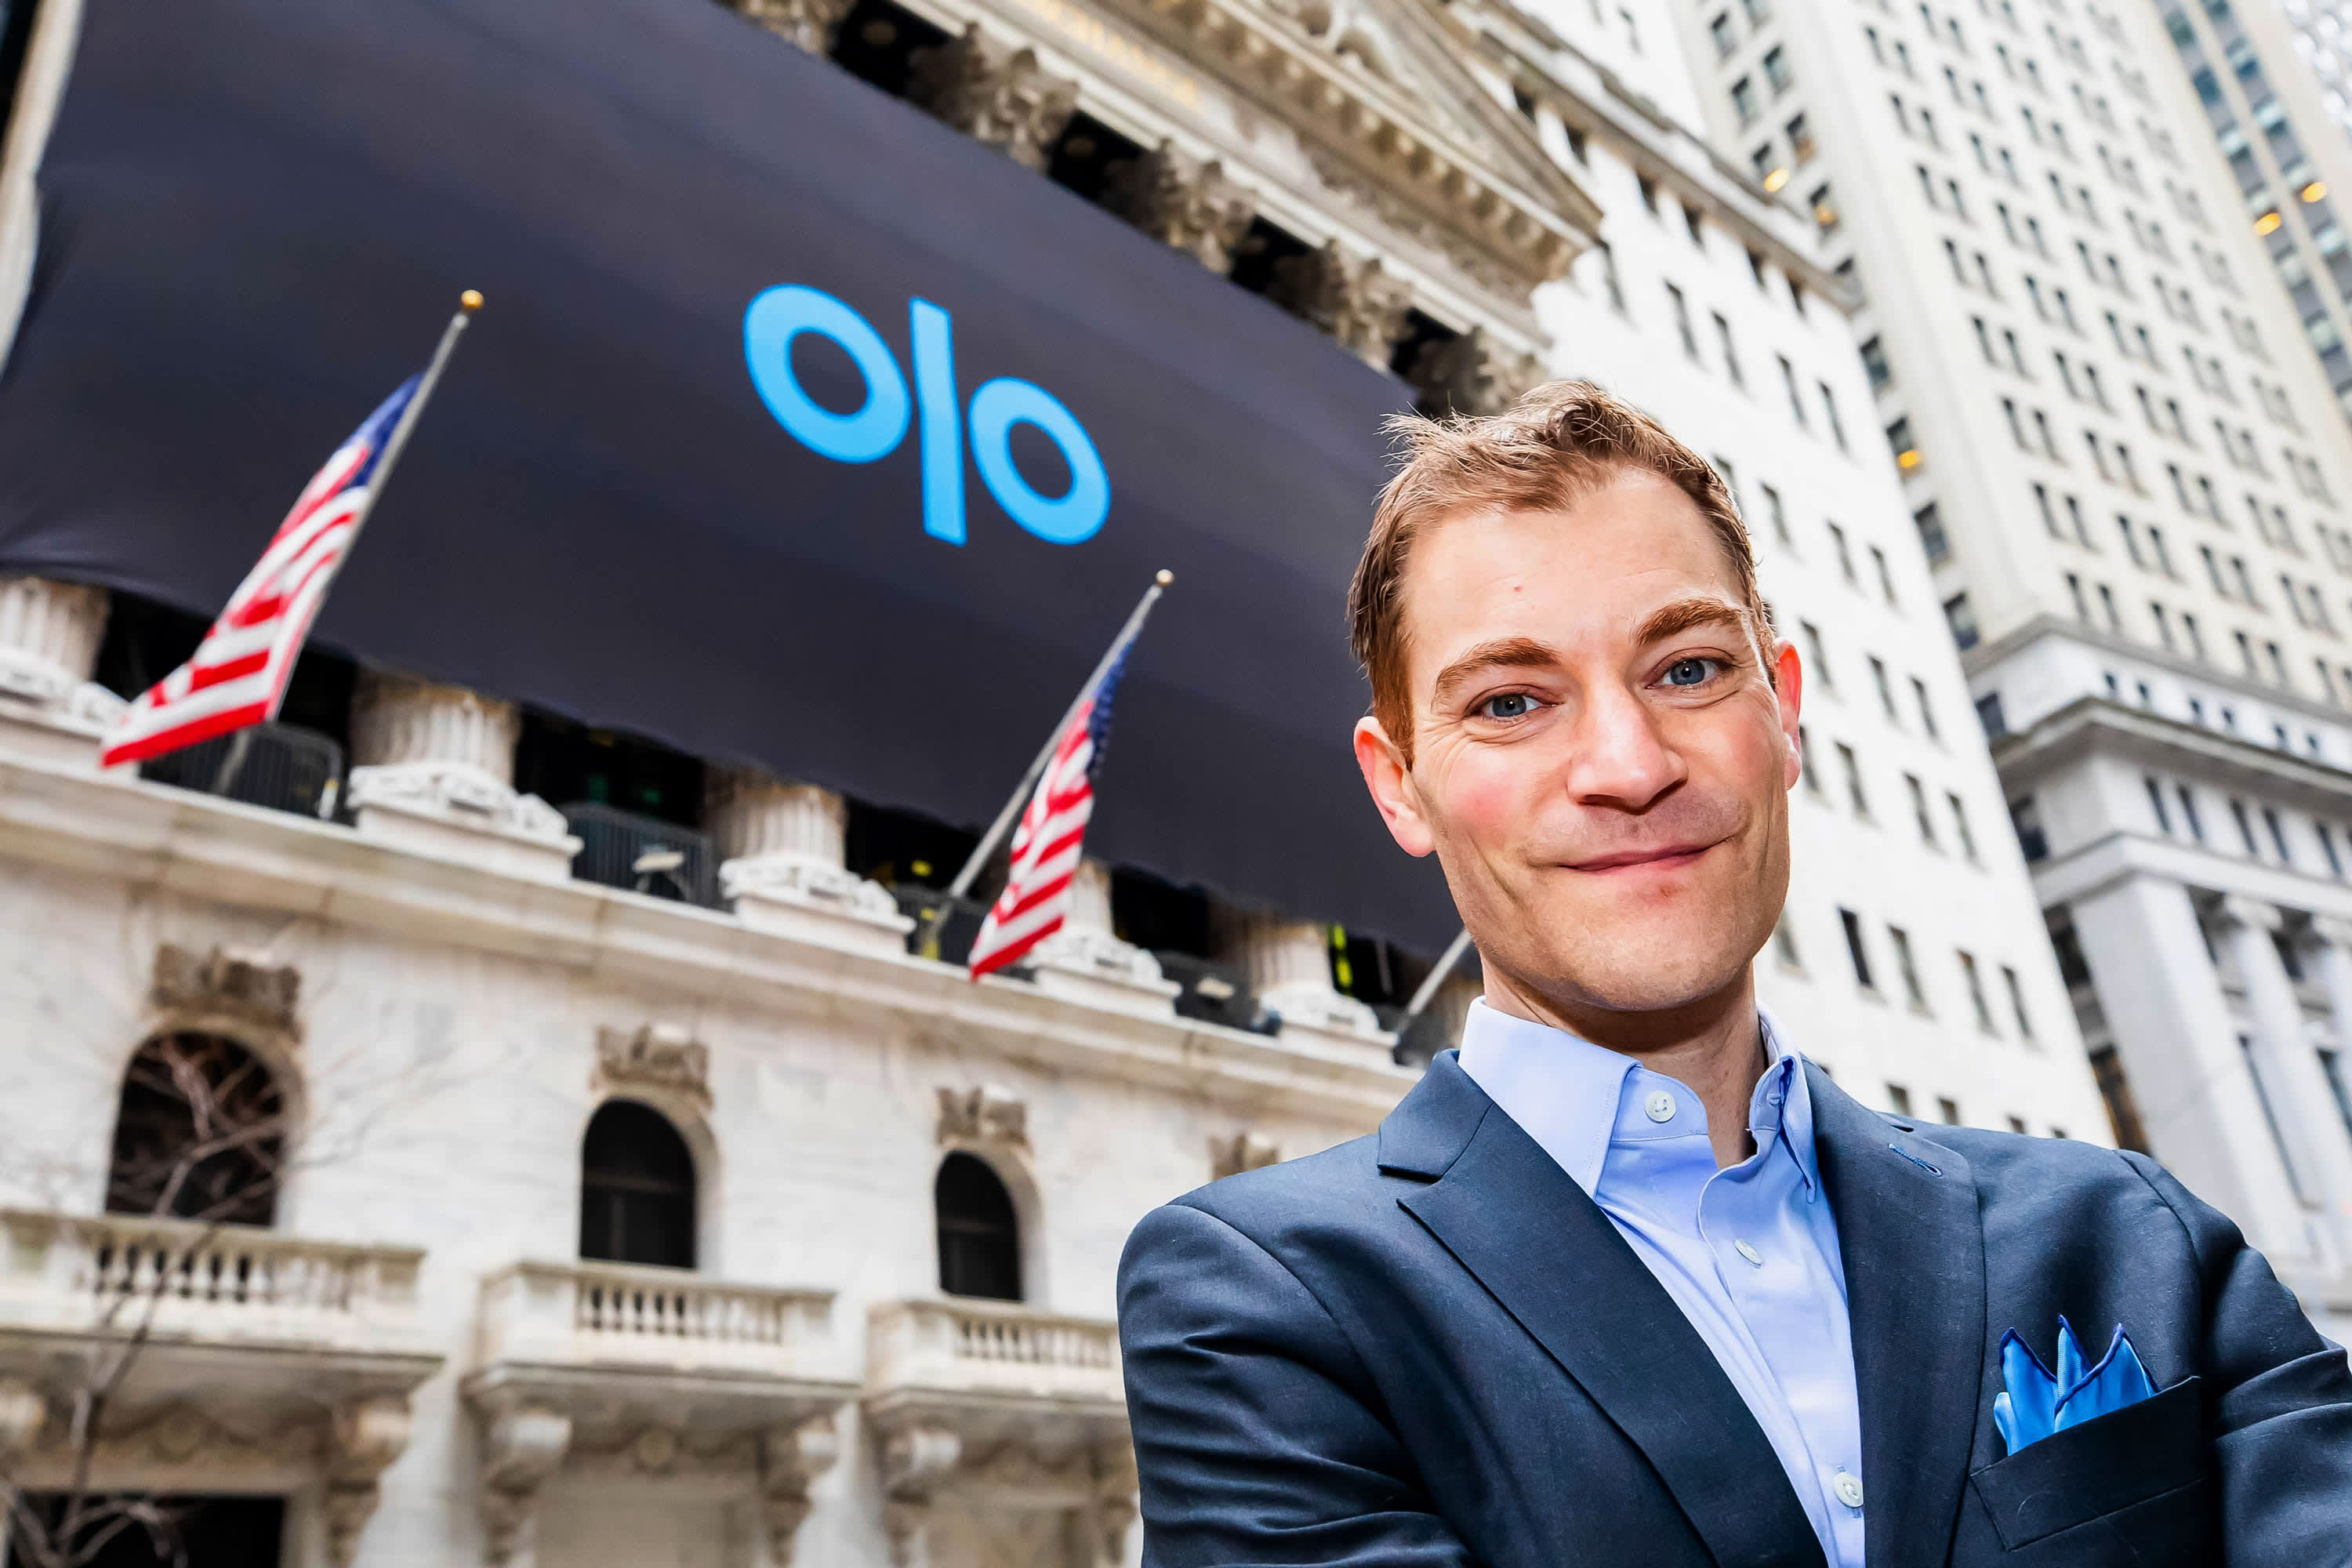 Shares of restaurant technology company Olo rise more than 20% in IPO as online orders rise